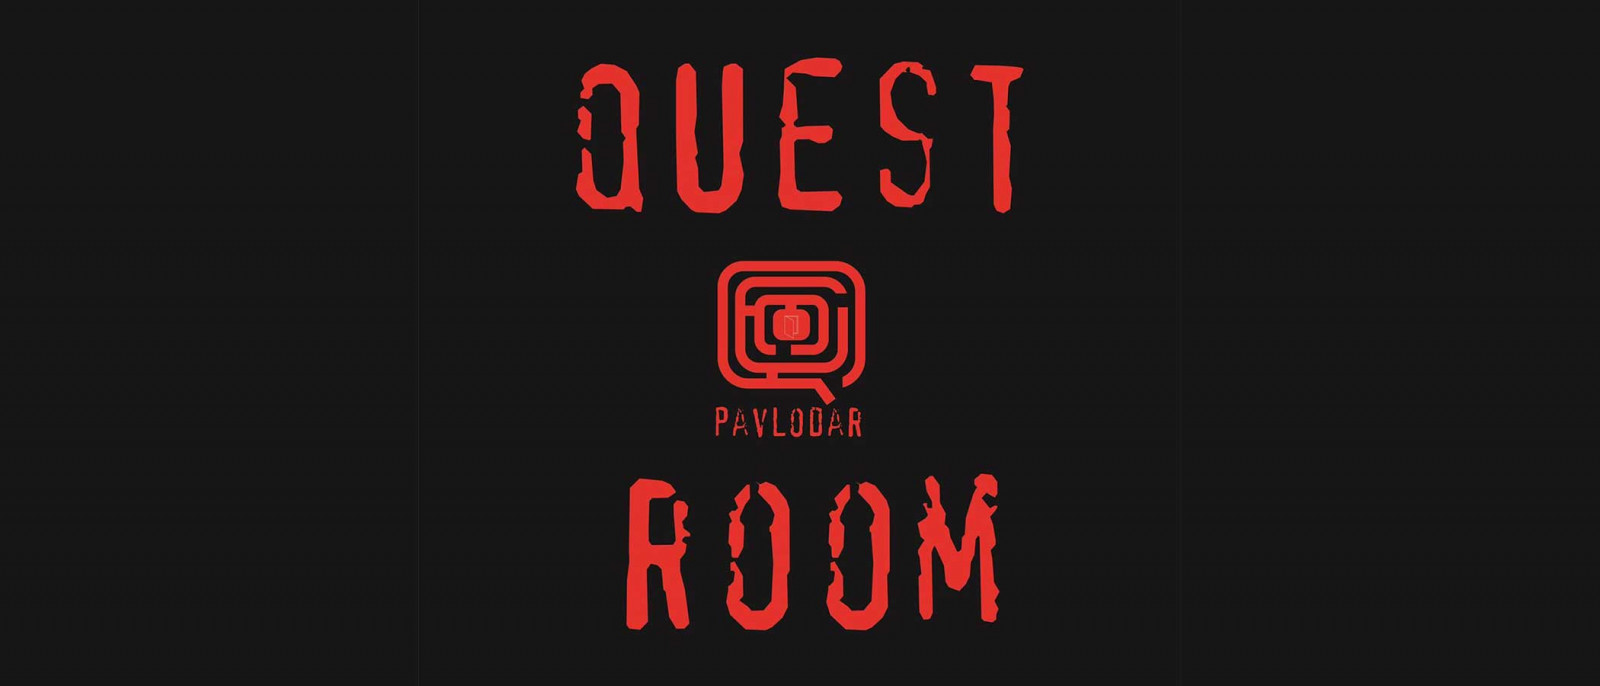 Quest room